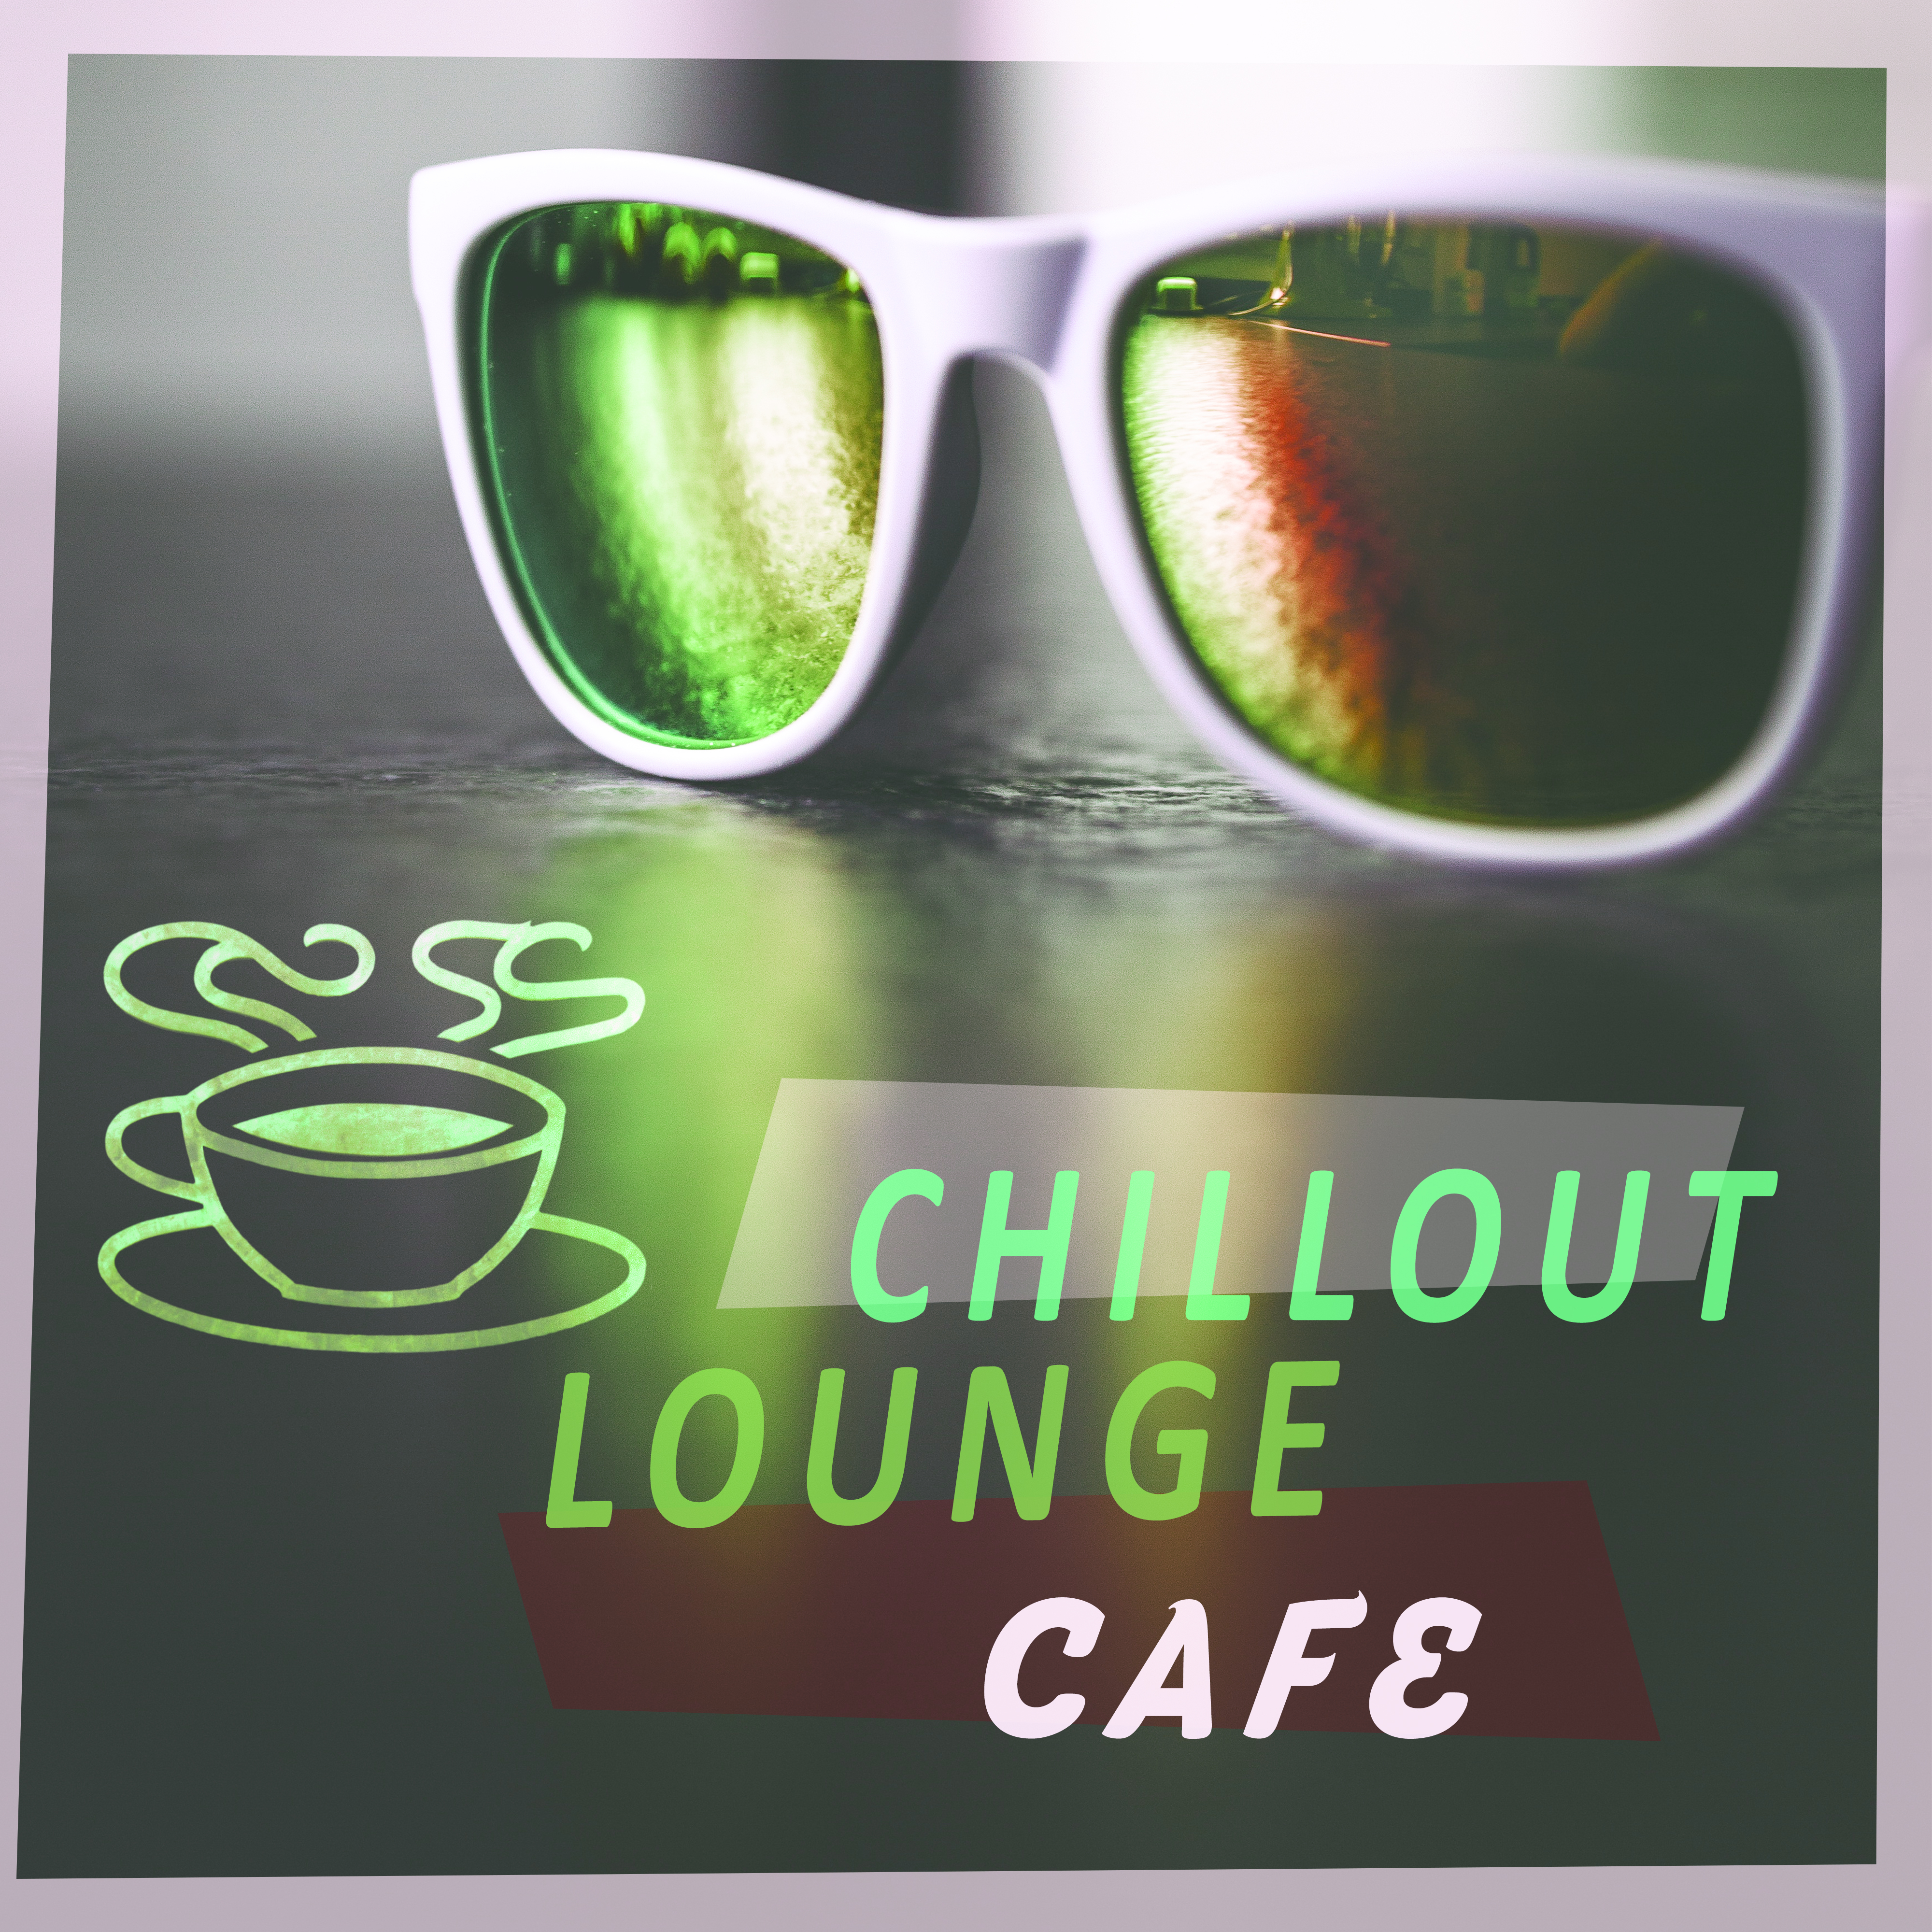 Chillout Lounge Cafe  Best Chill Out Music for Restaurant, Music to Relax, Hot Coffee, Chill Yourself